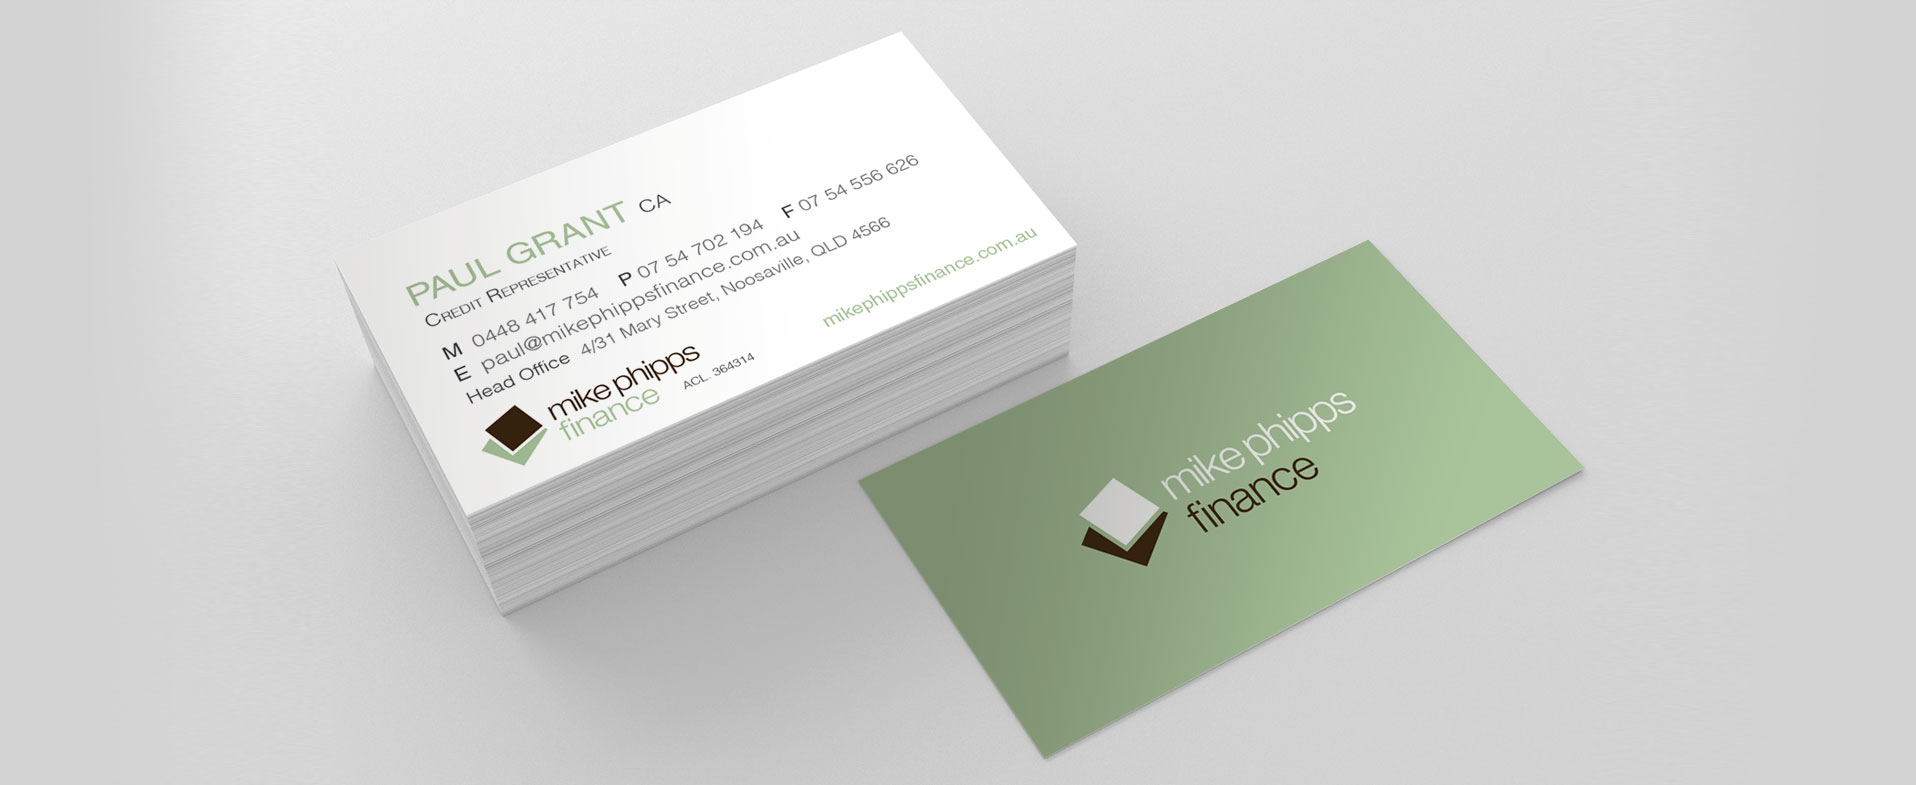 Mike Phipps Business cards